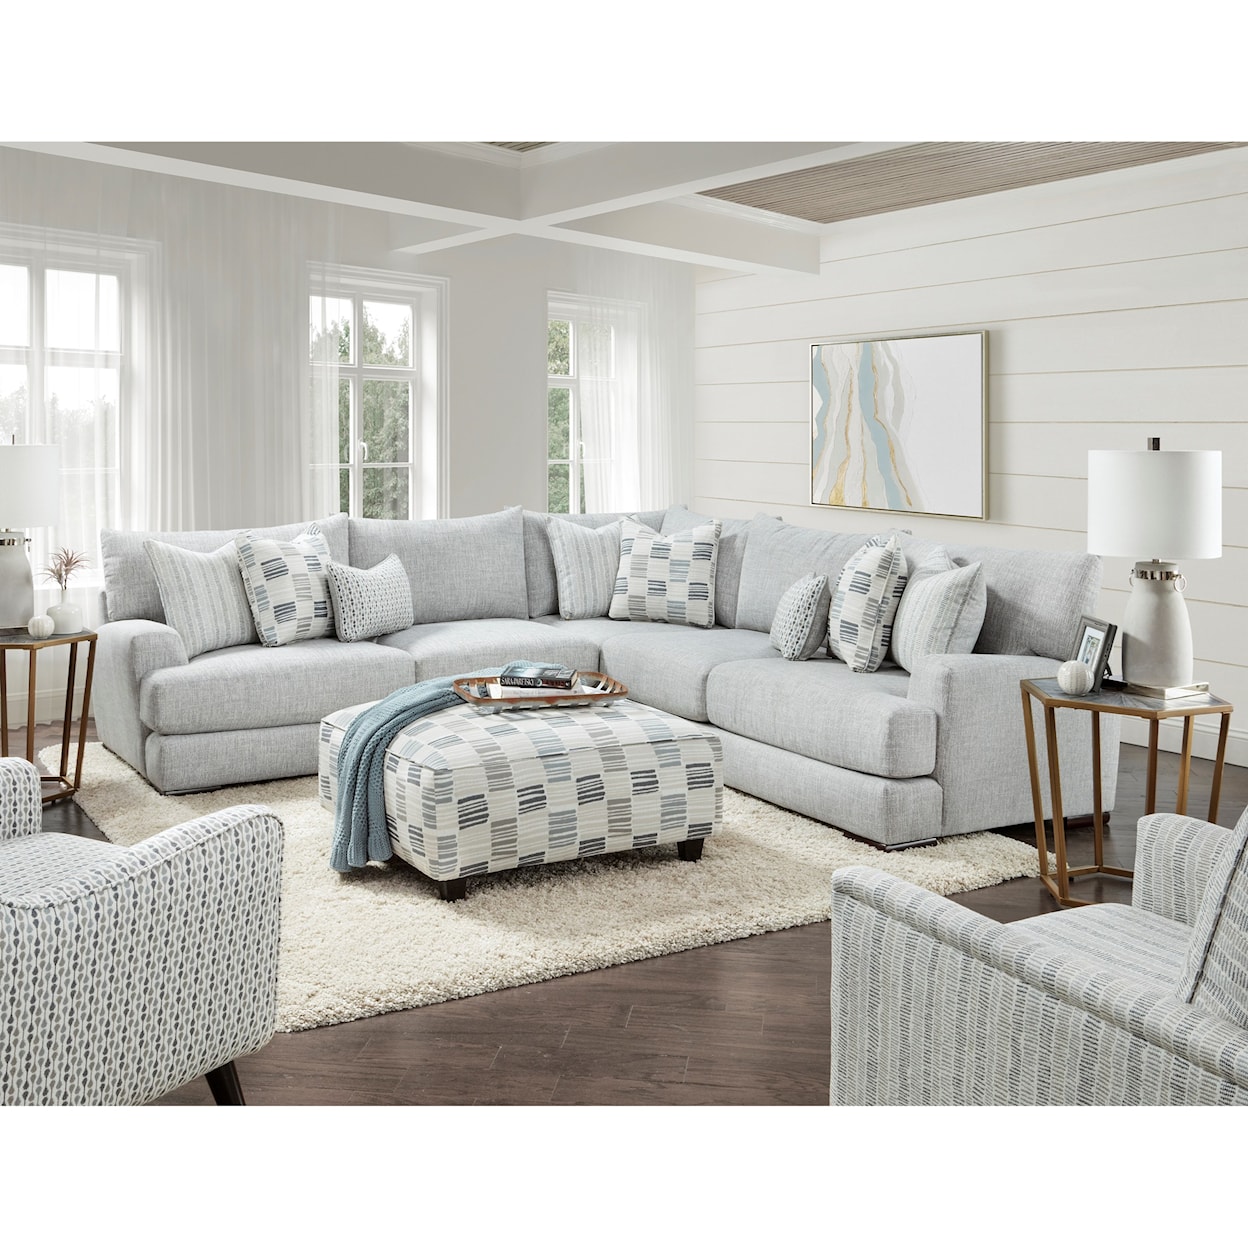 Fusion Furniture 51 ENTICE PAVER 3-Piece Sectional